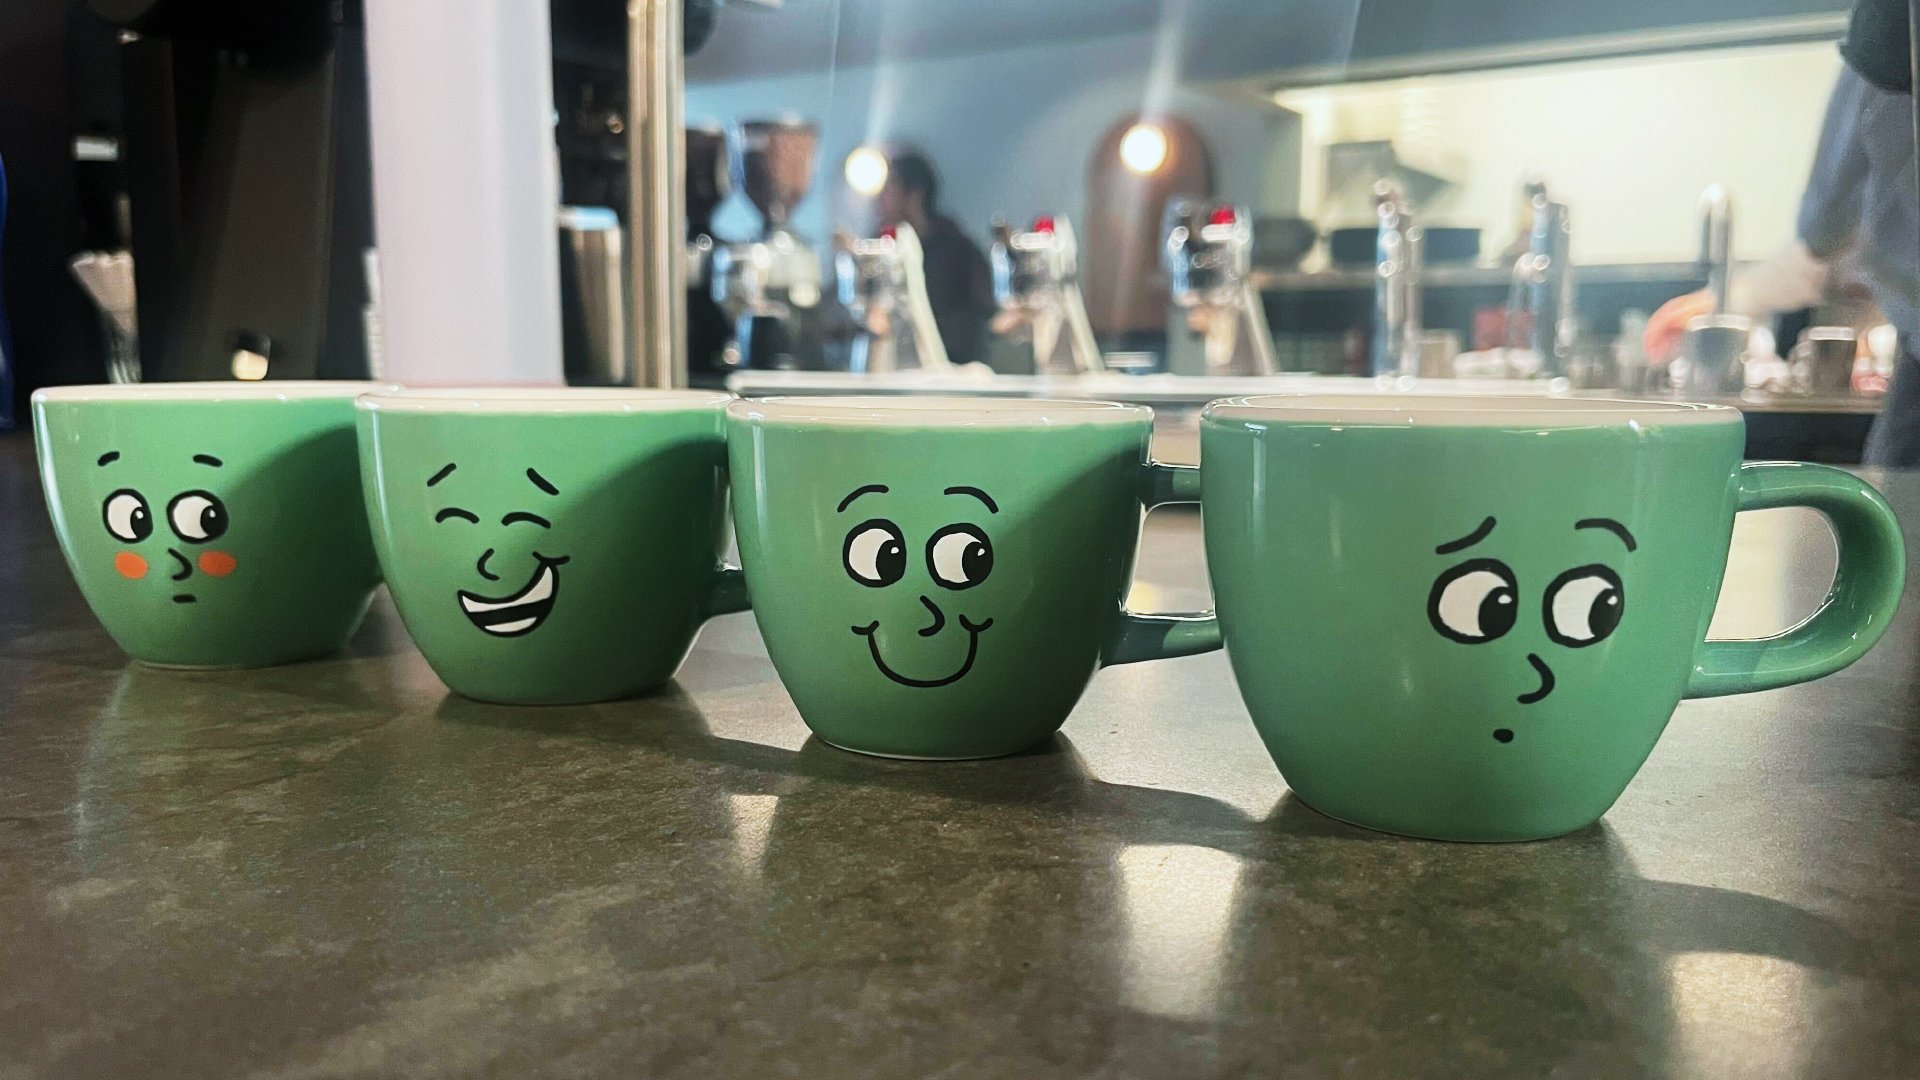 Four teal mugs featuring different Collin expressions sit side by side. The coffee shop is in the background.